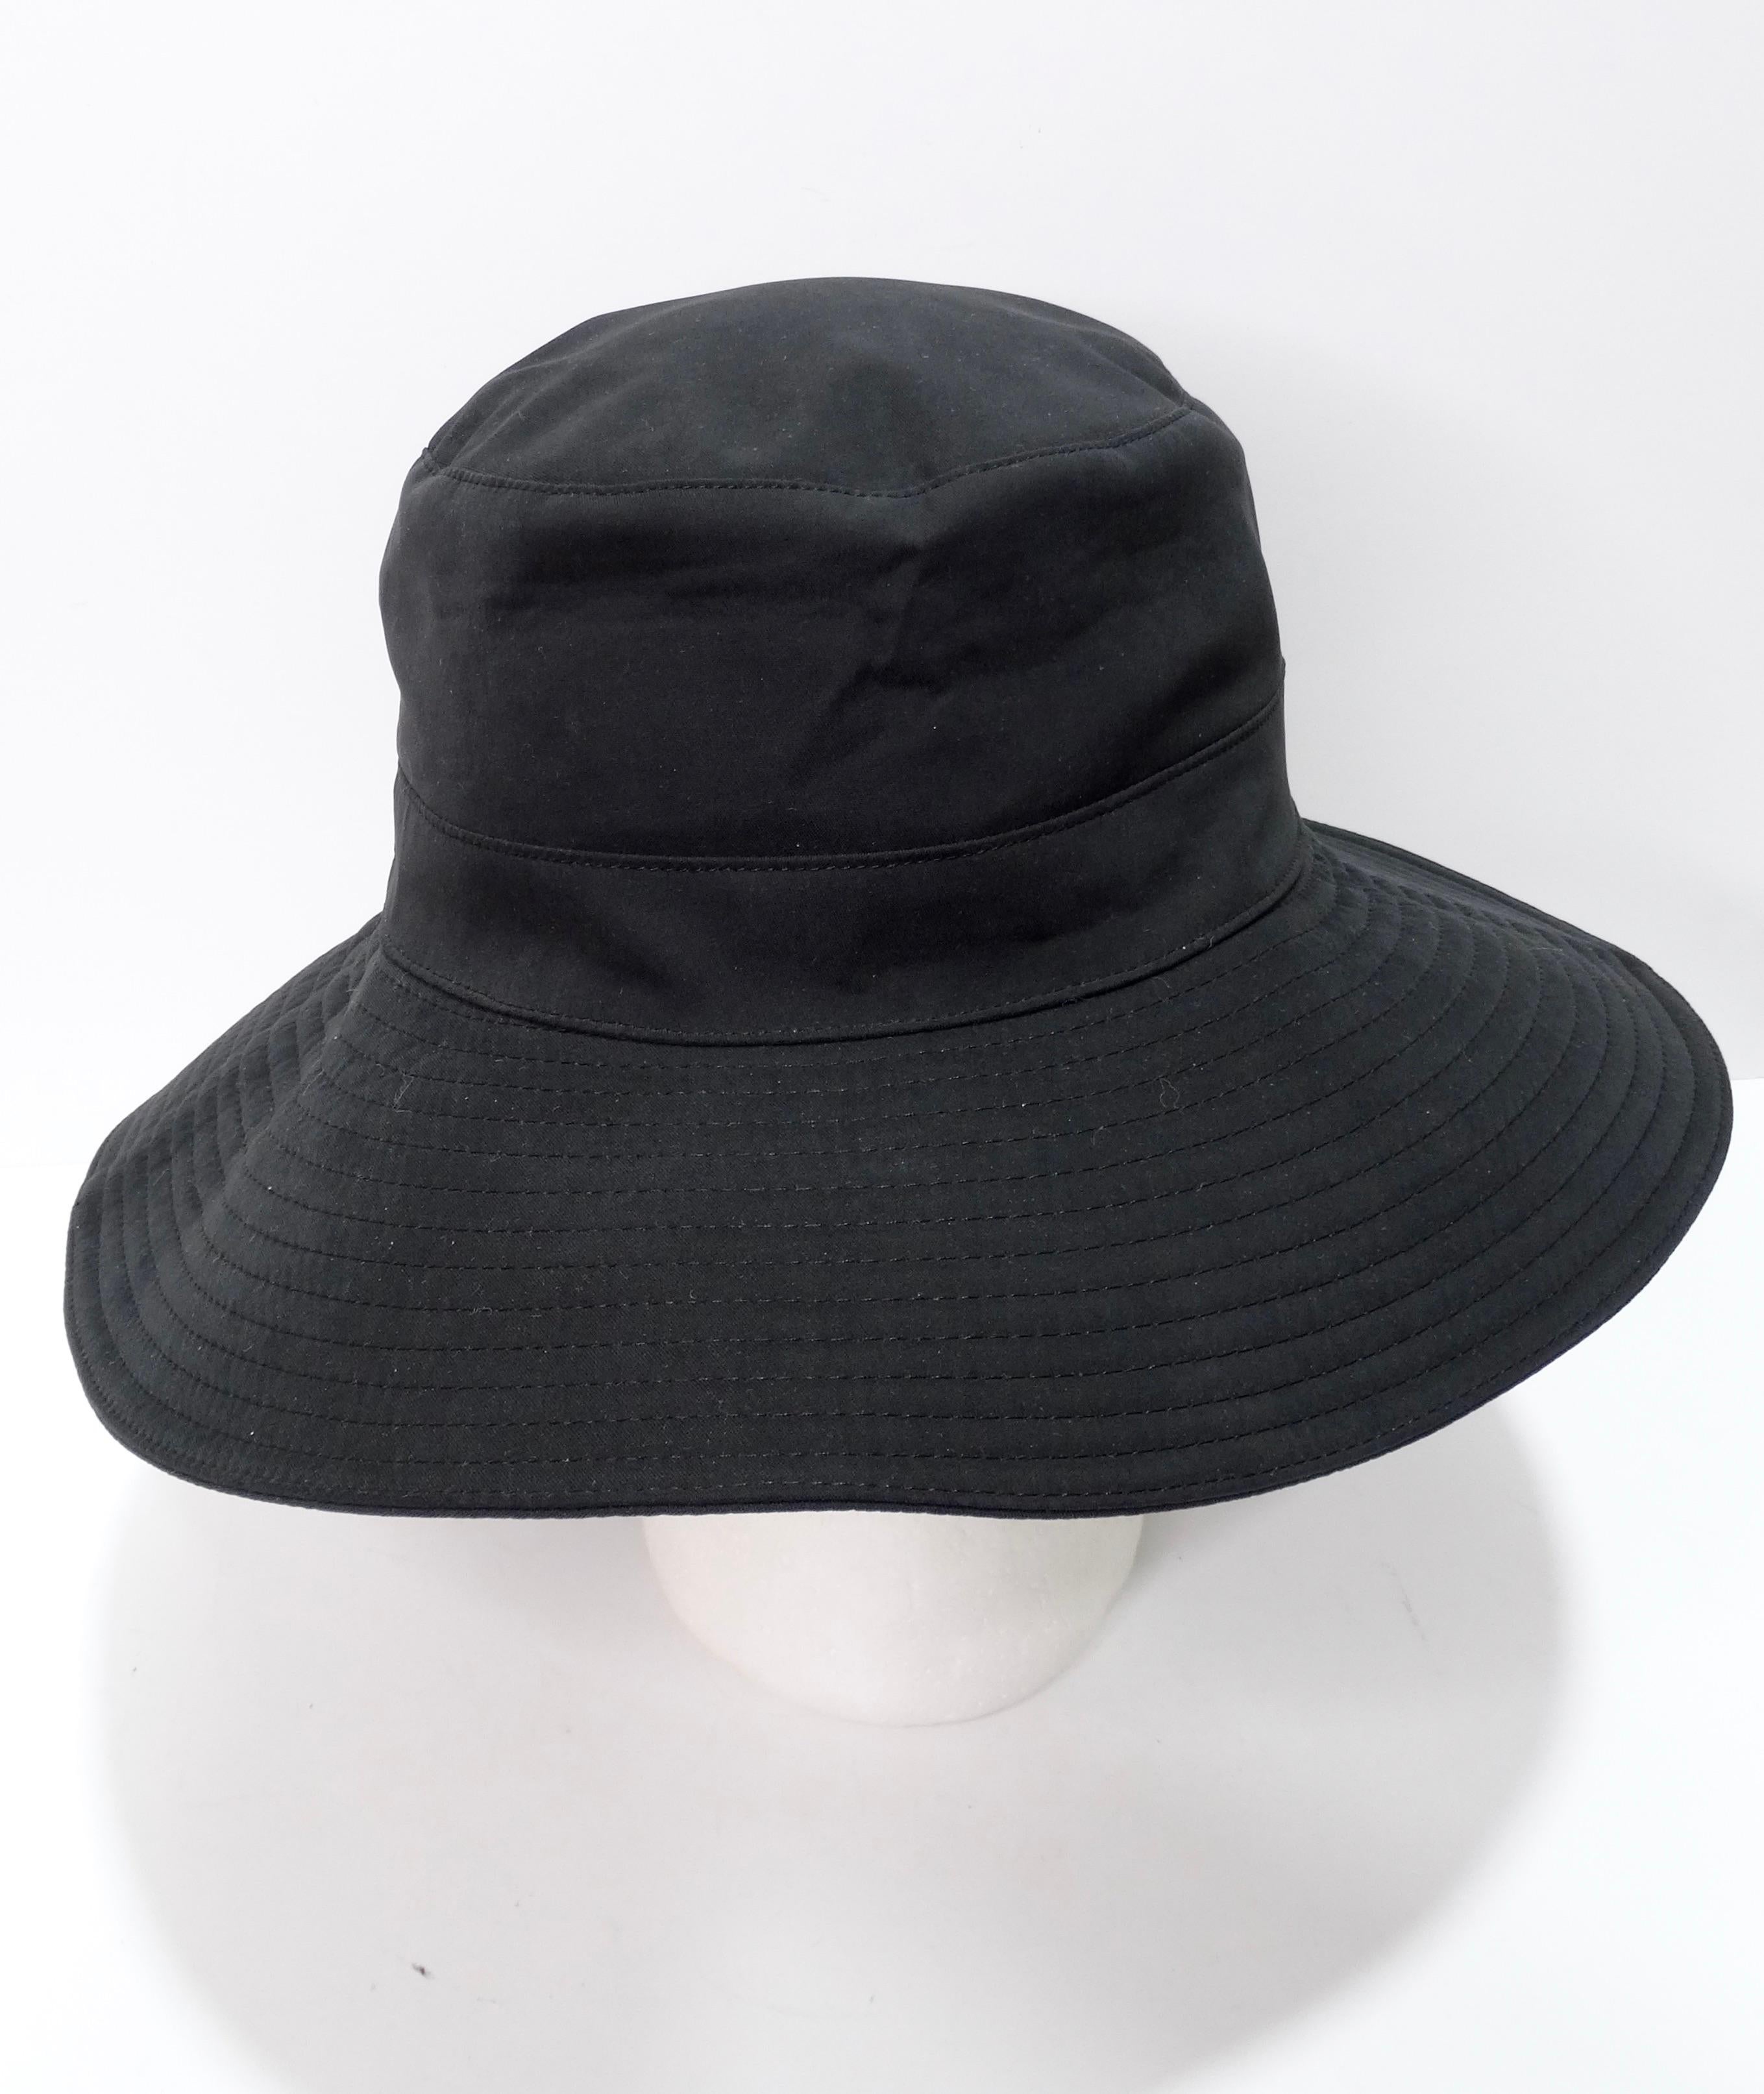 Adjustable to your liking, this hat is great for any weather. During fall is the perfect time to add some spice into your wardrobe. Since the black bucket hat can be worn many different ways, it is an amazing piece to have. From a YSL blazer to